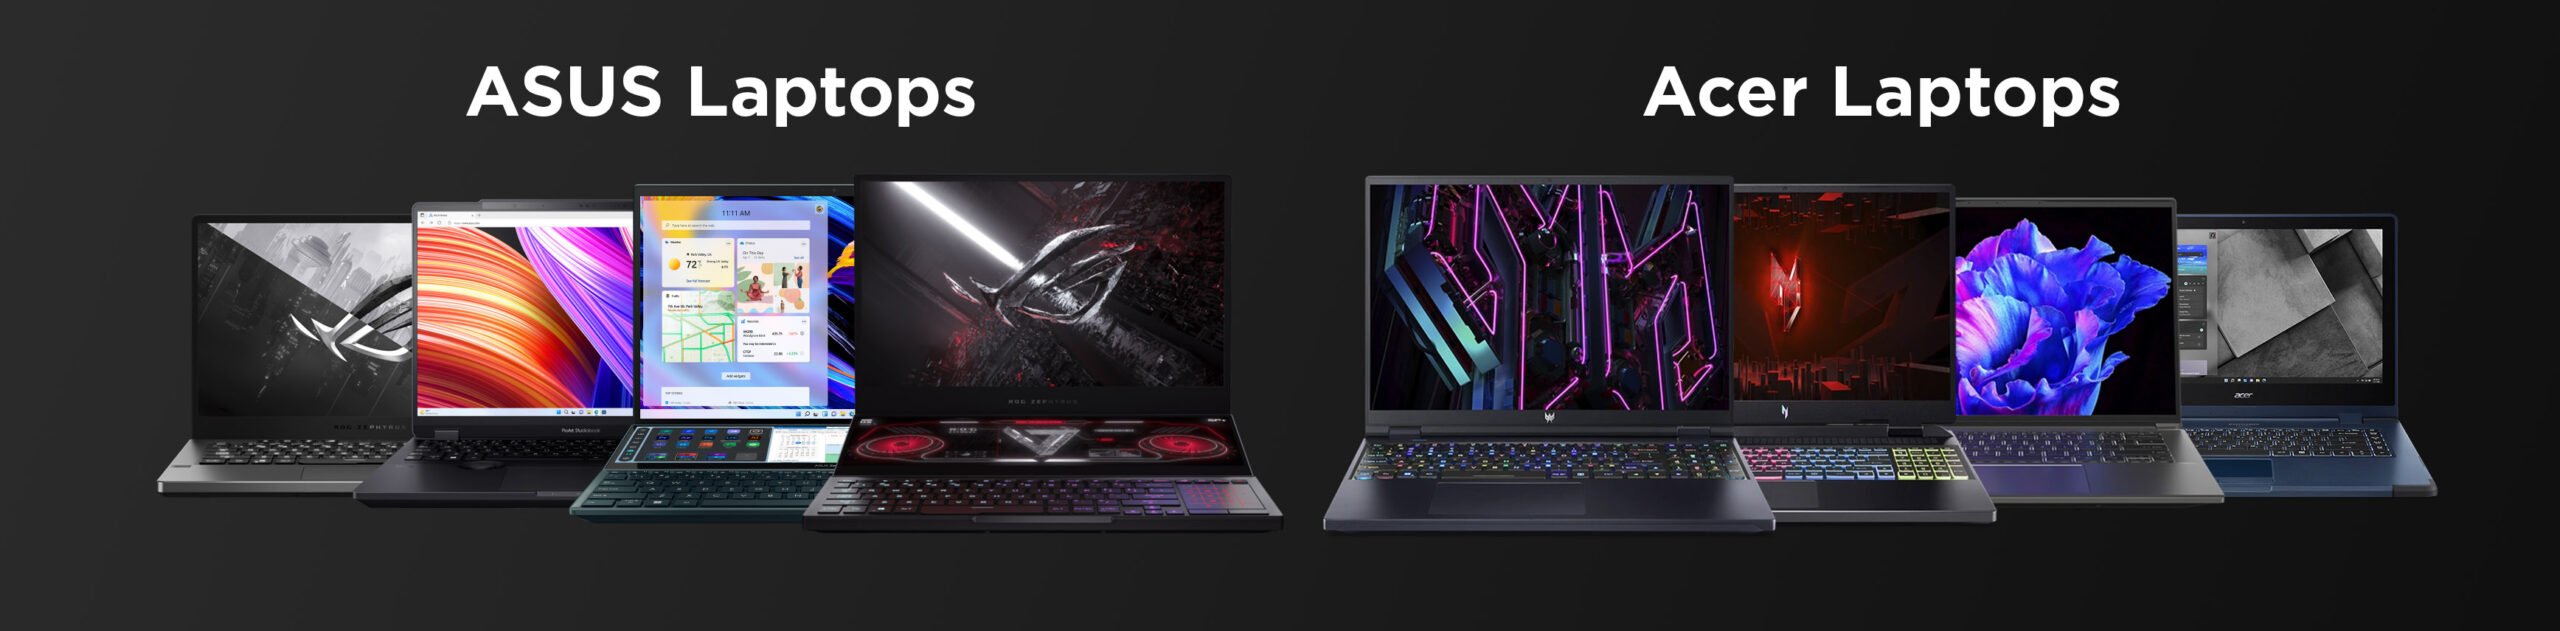 ASUS and Acer Laptops